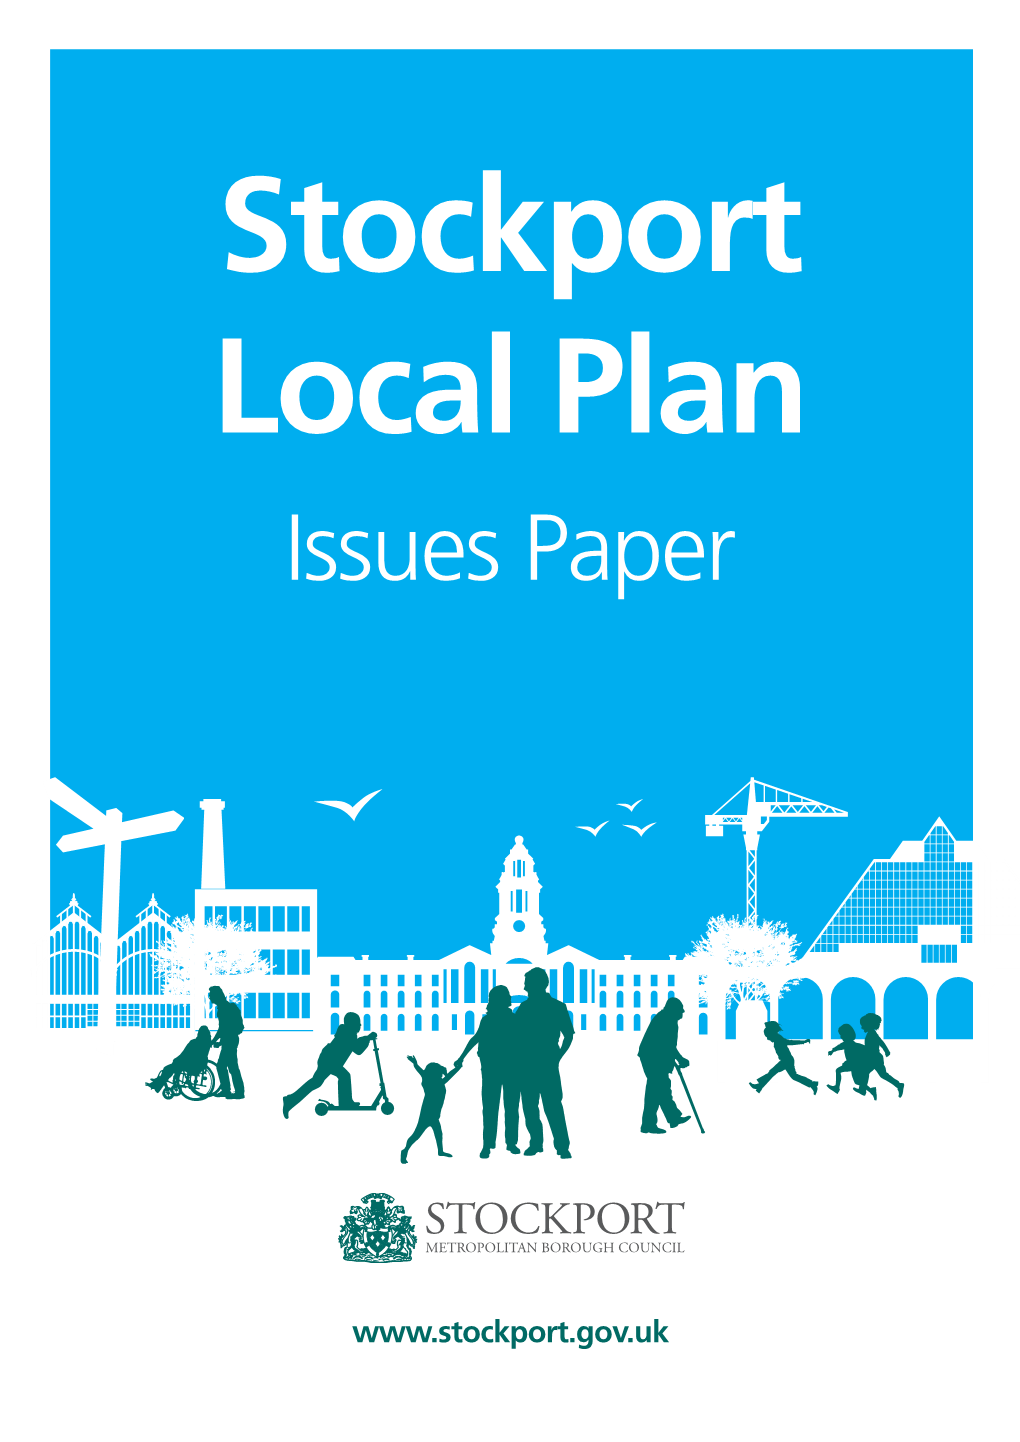 Stockport Local Plan Issues Paper